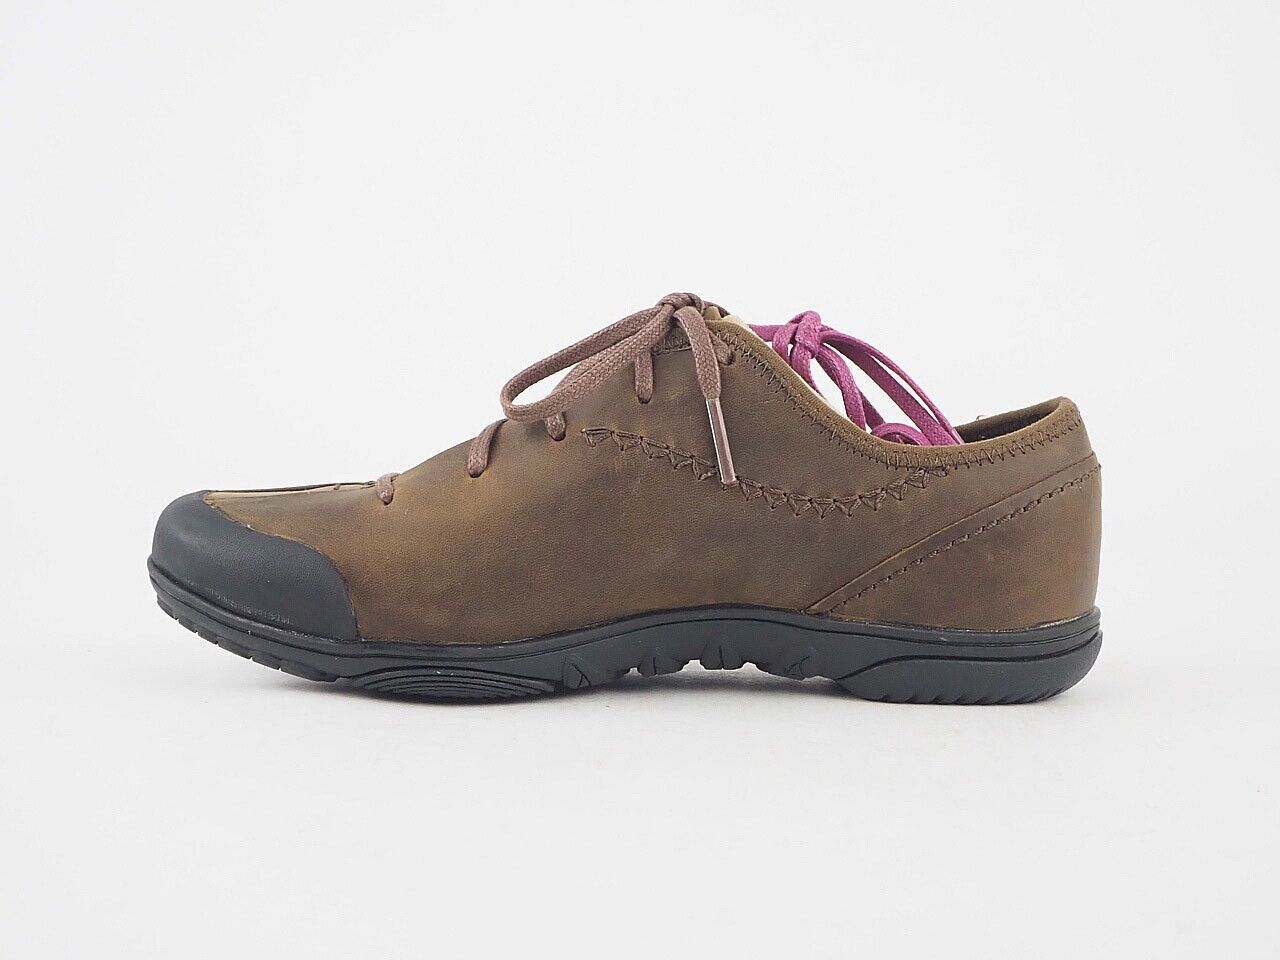 Womens Timberland Ntch Oxford 19653 Brown Leather Walking Waterproof Light Shoes - London Top Style